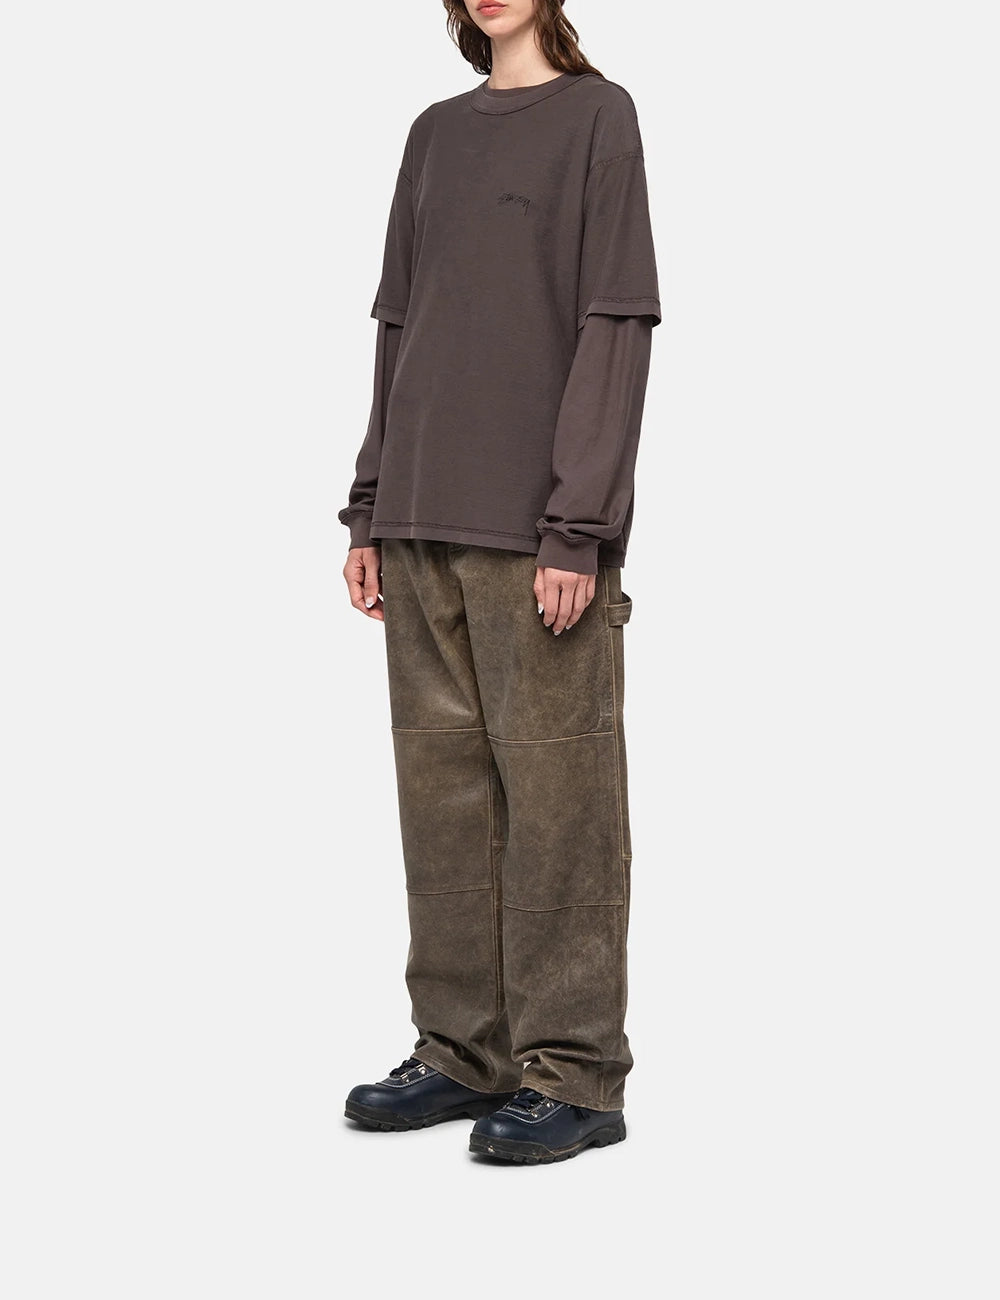 STUSSY PIG DYED INSIDE OUT CREW